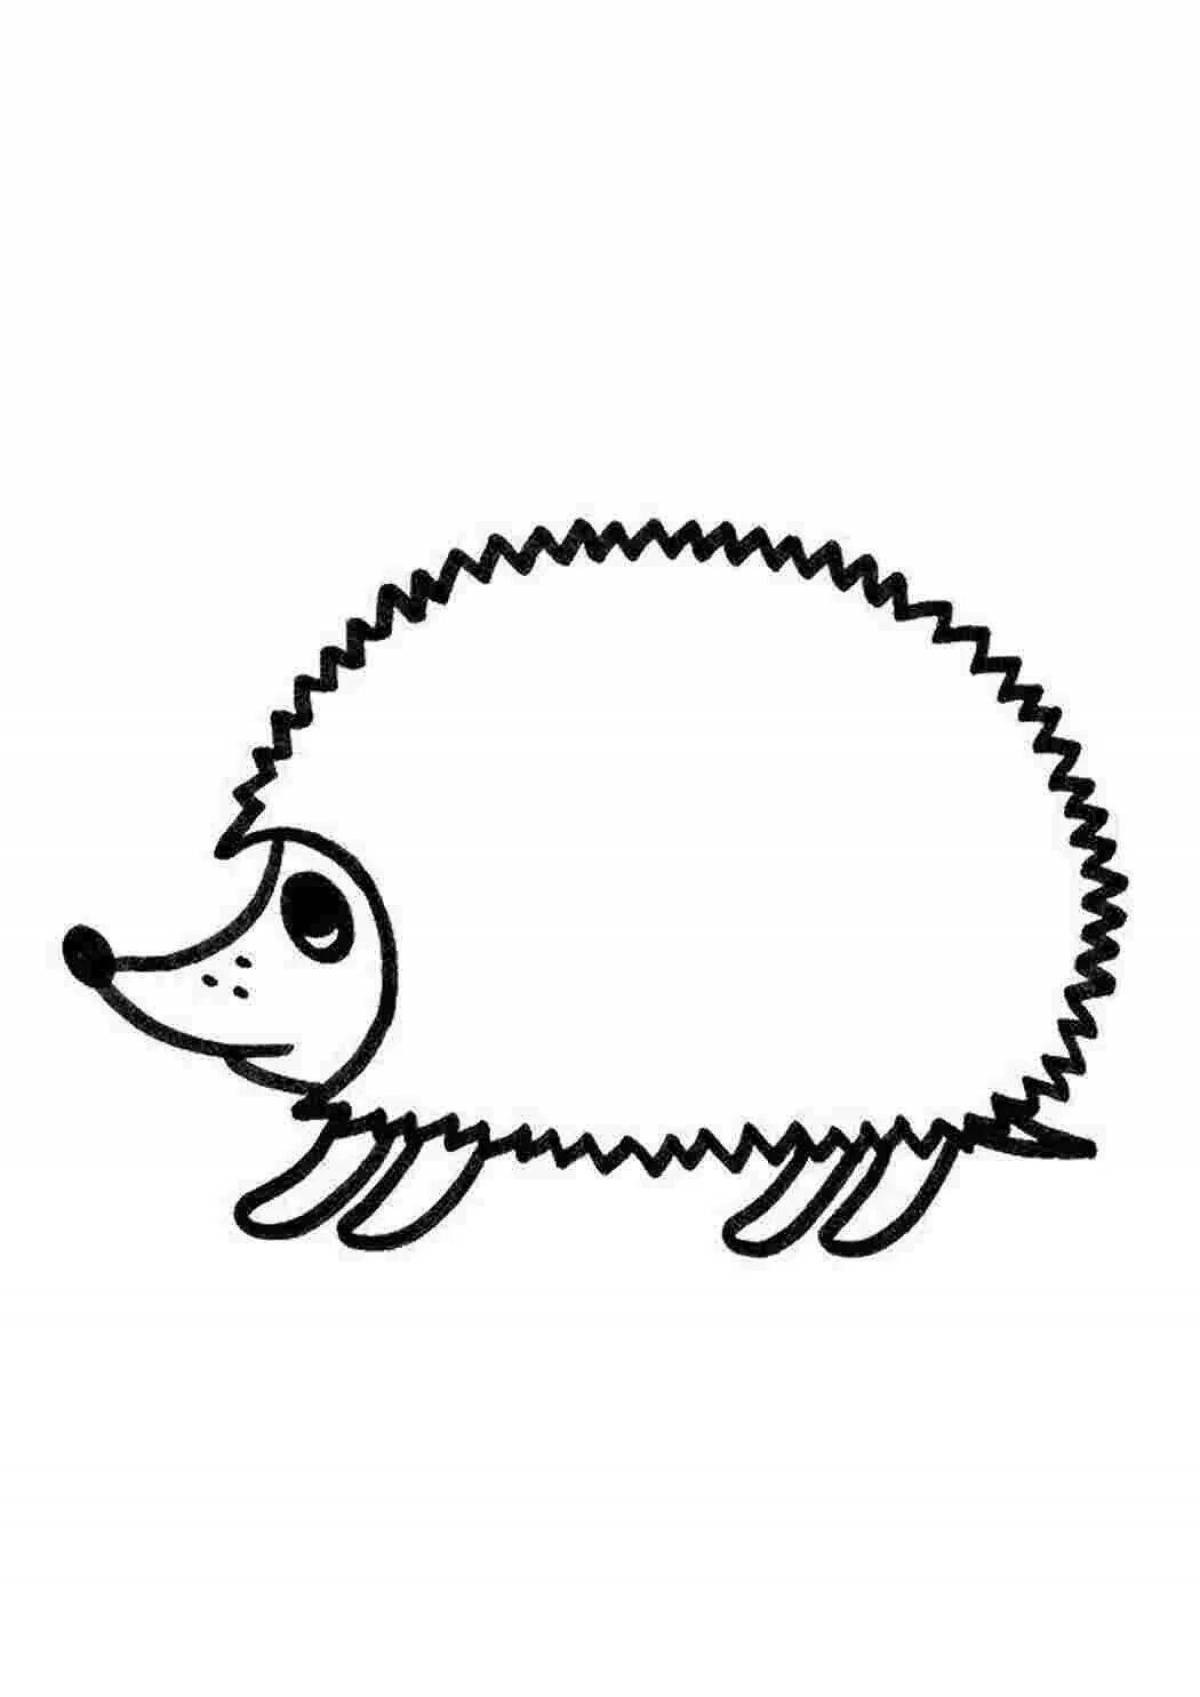 A fun hedgehog without needles for inexperienced students